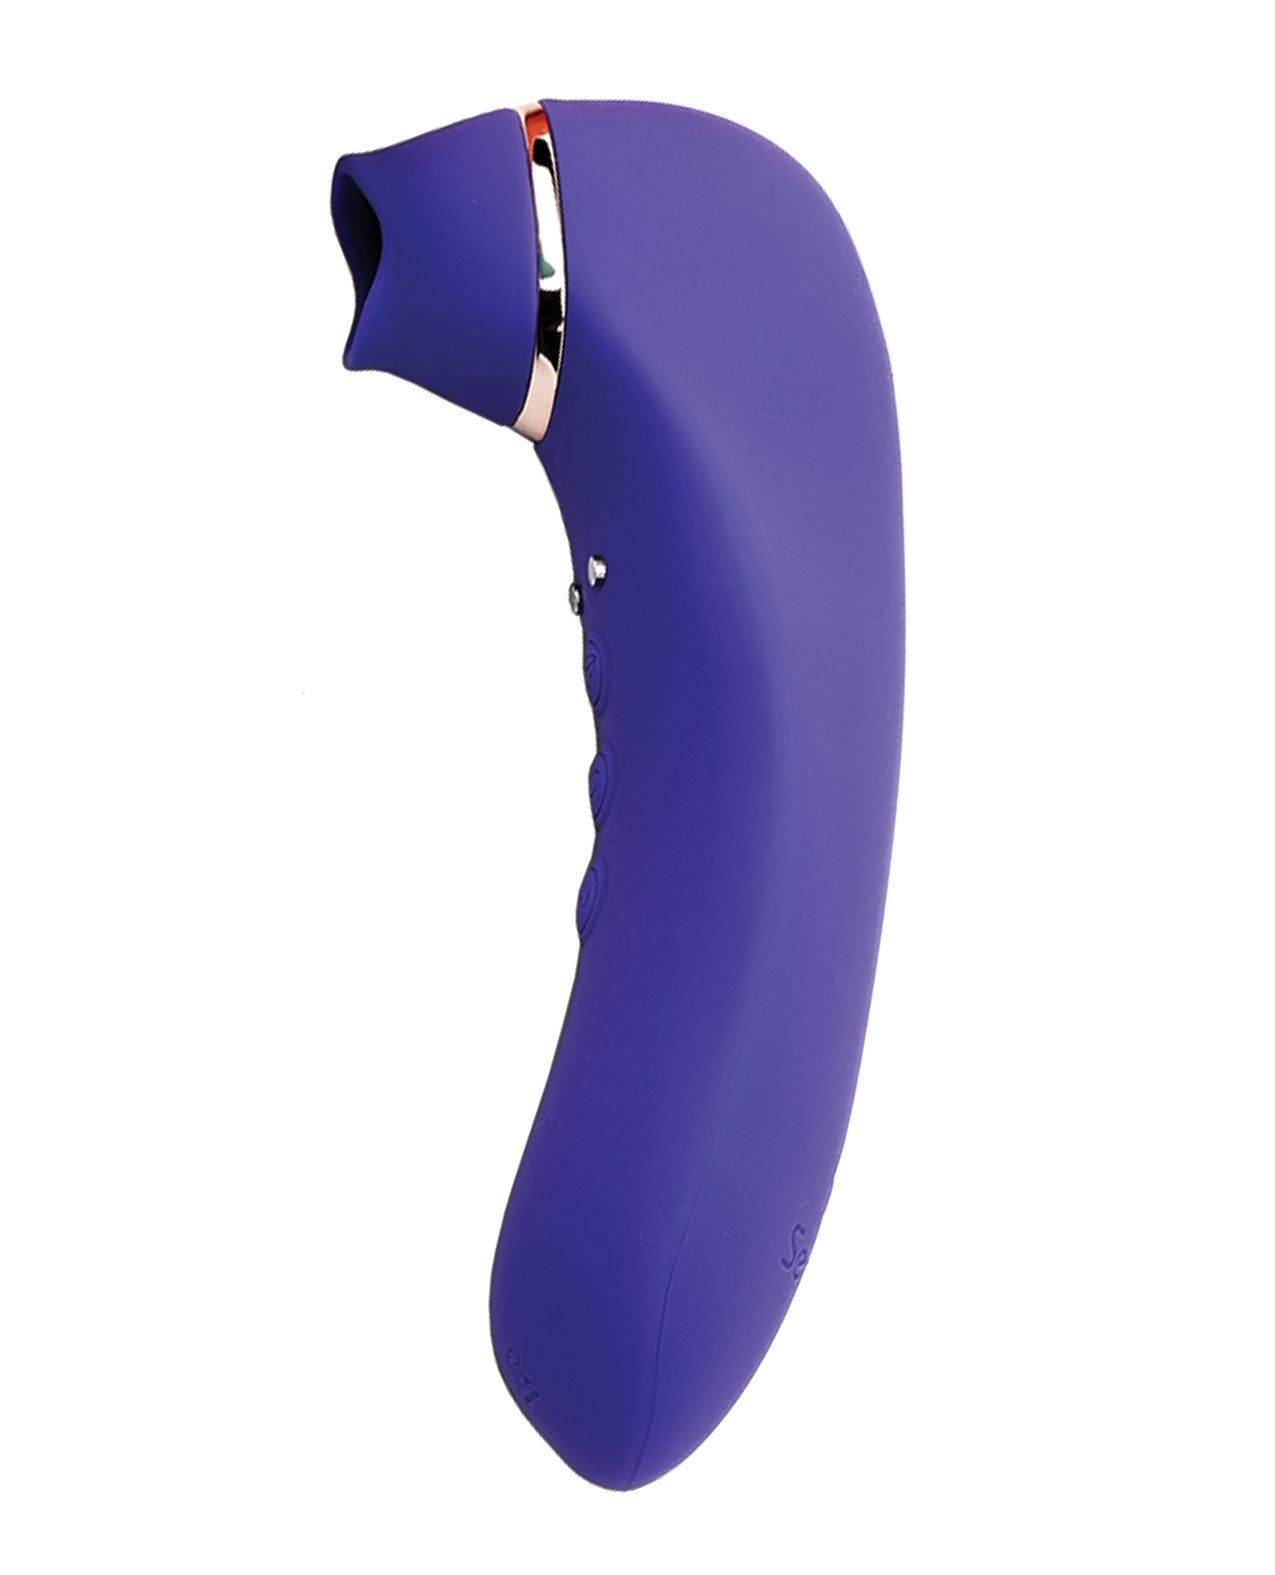 Side view of the toys shows its suction large and flexible mouth (ultra violet).